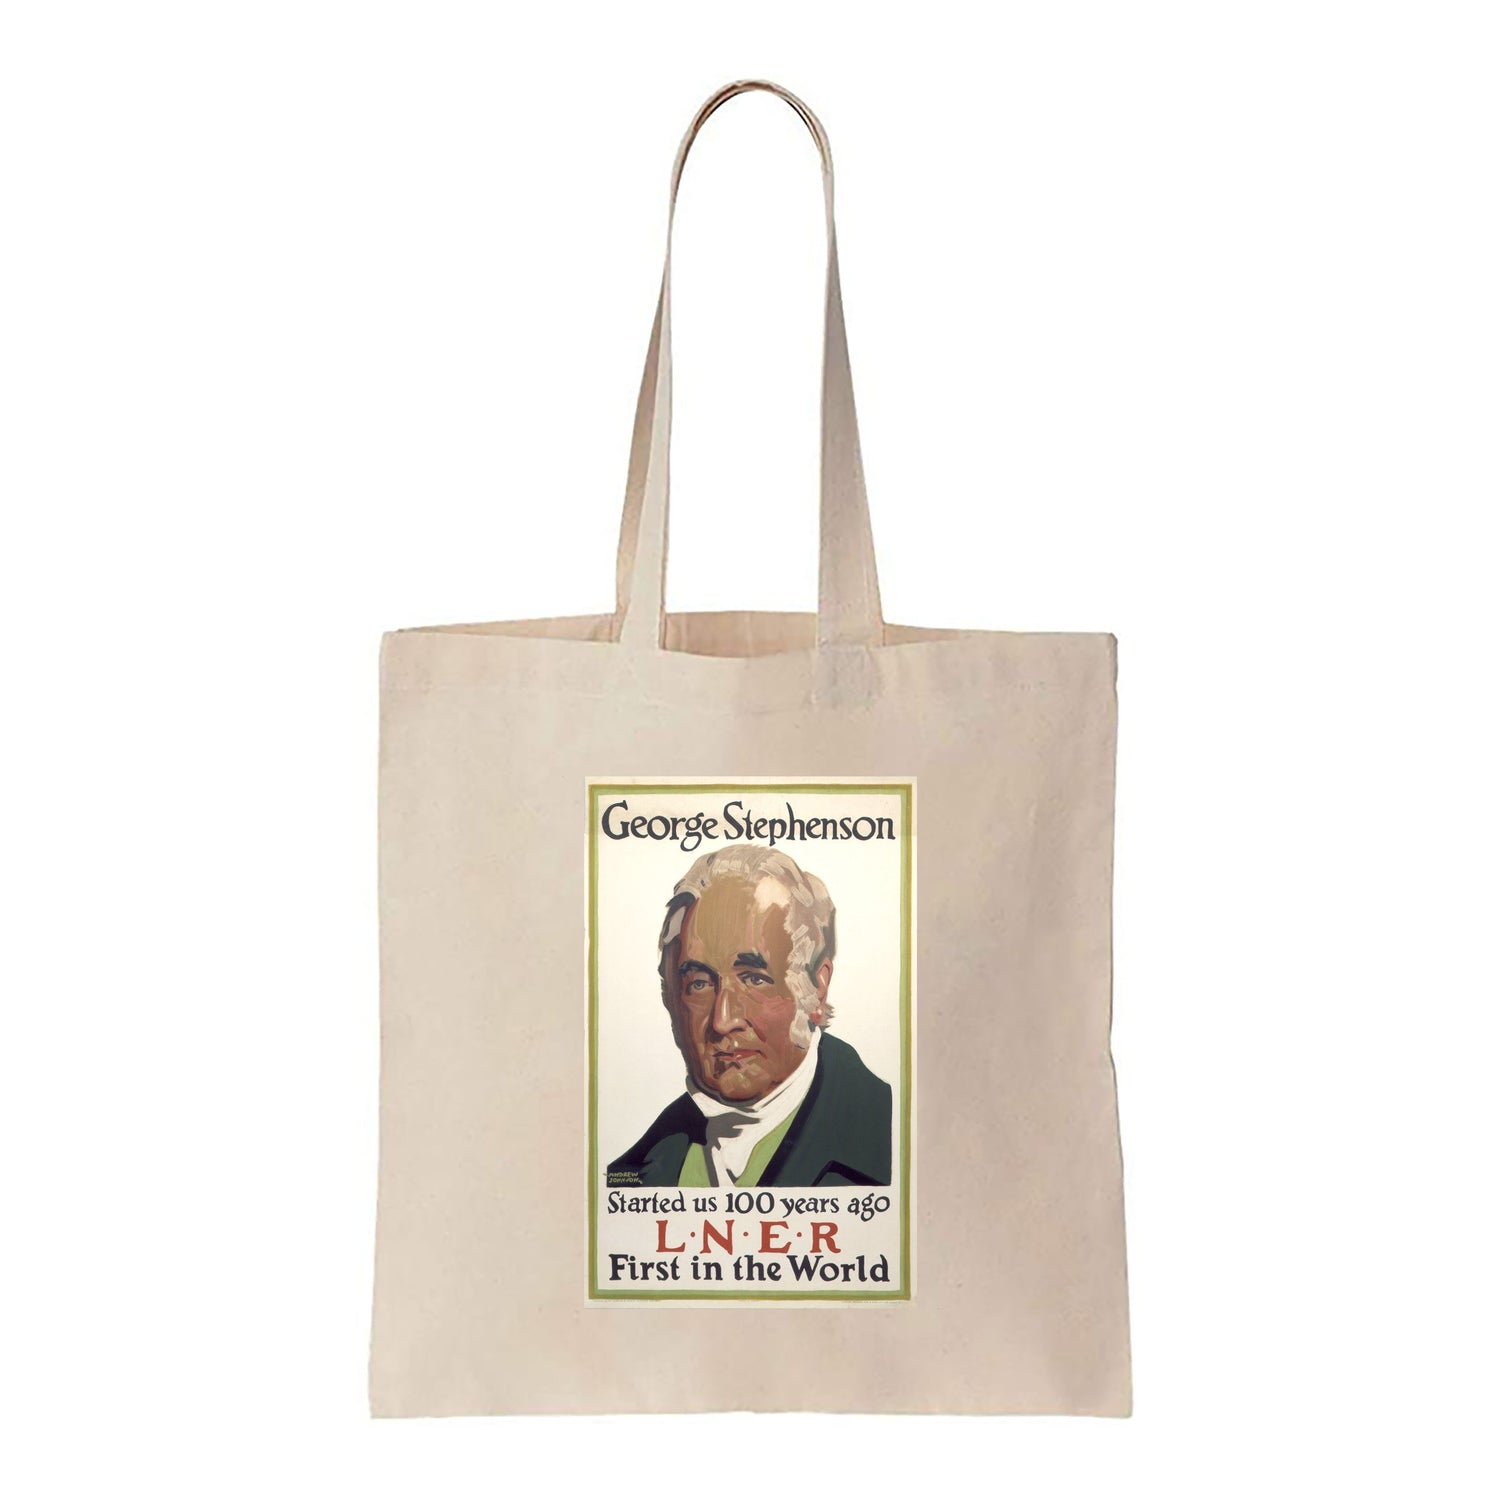 George Stephenson - LNER First in the World - Canvas Tote Bag